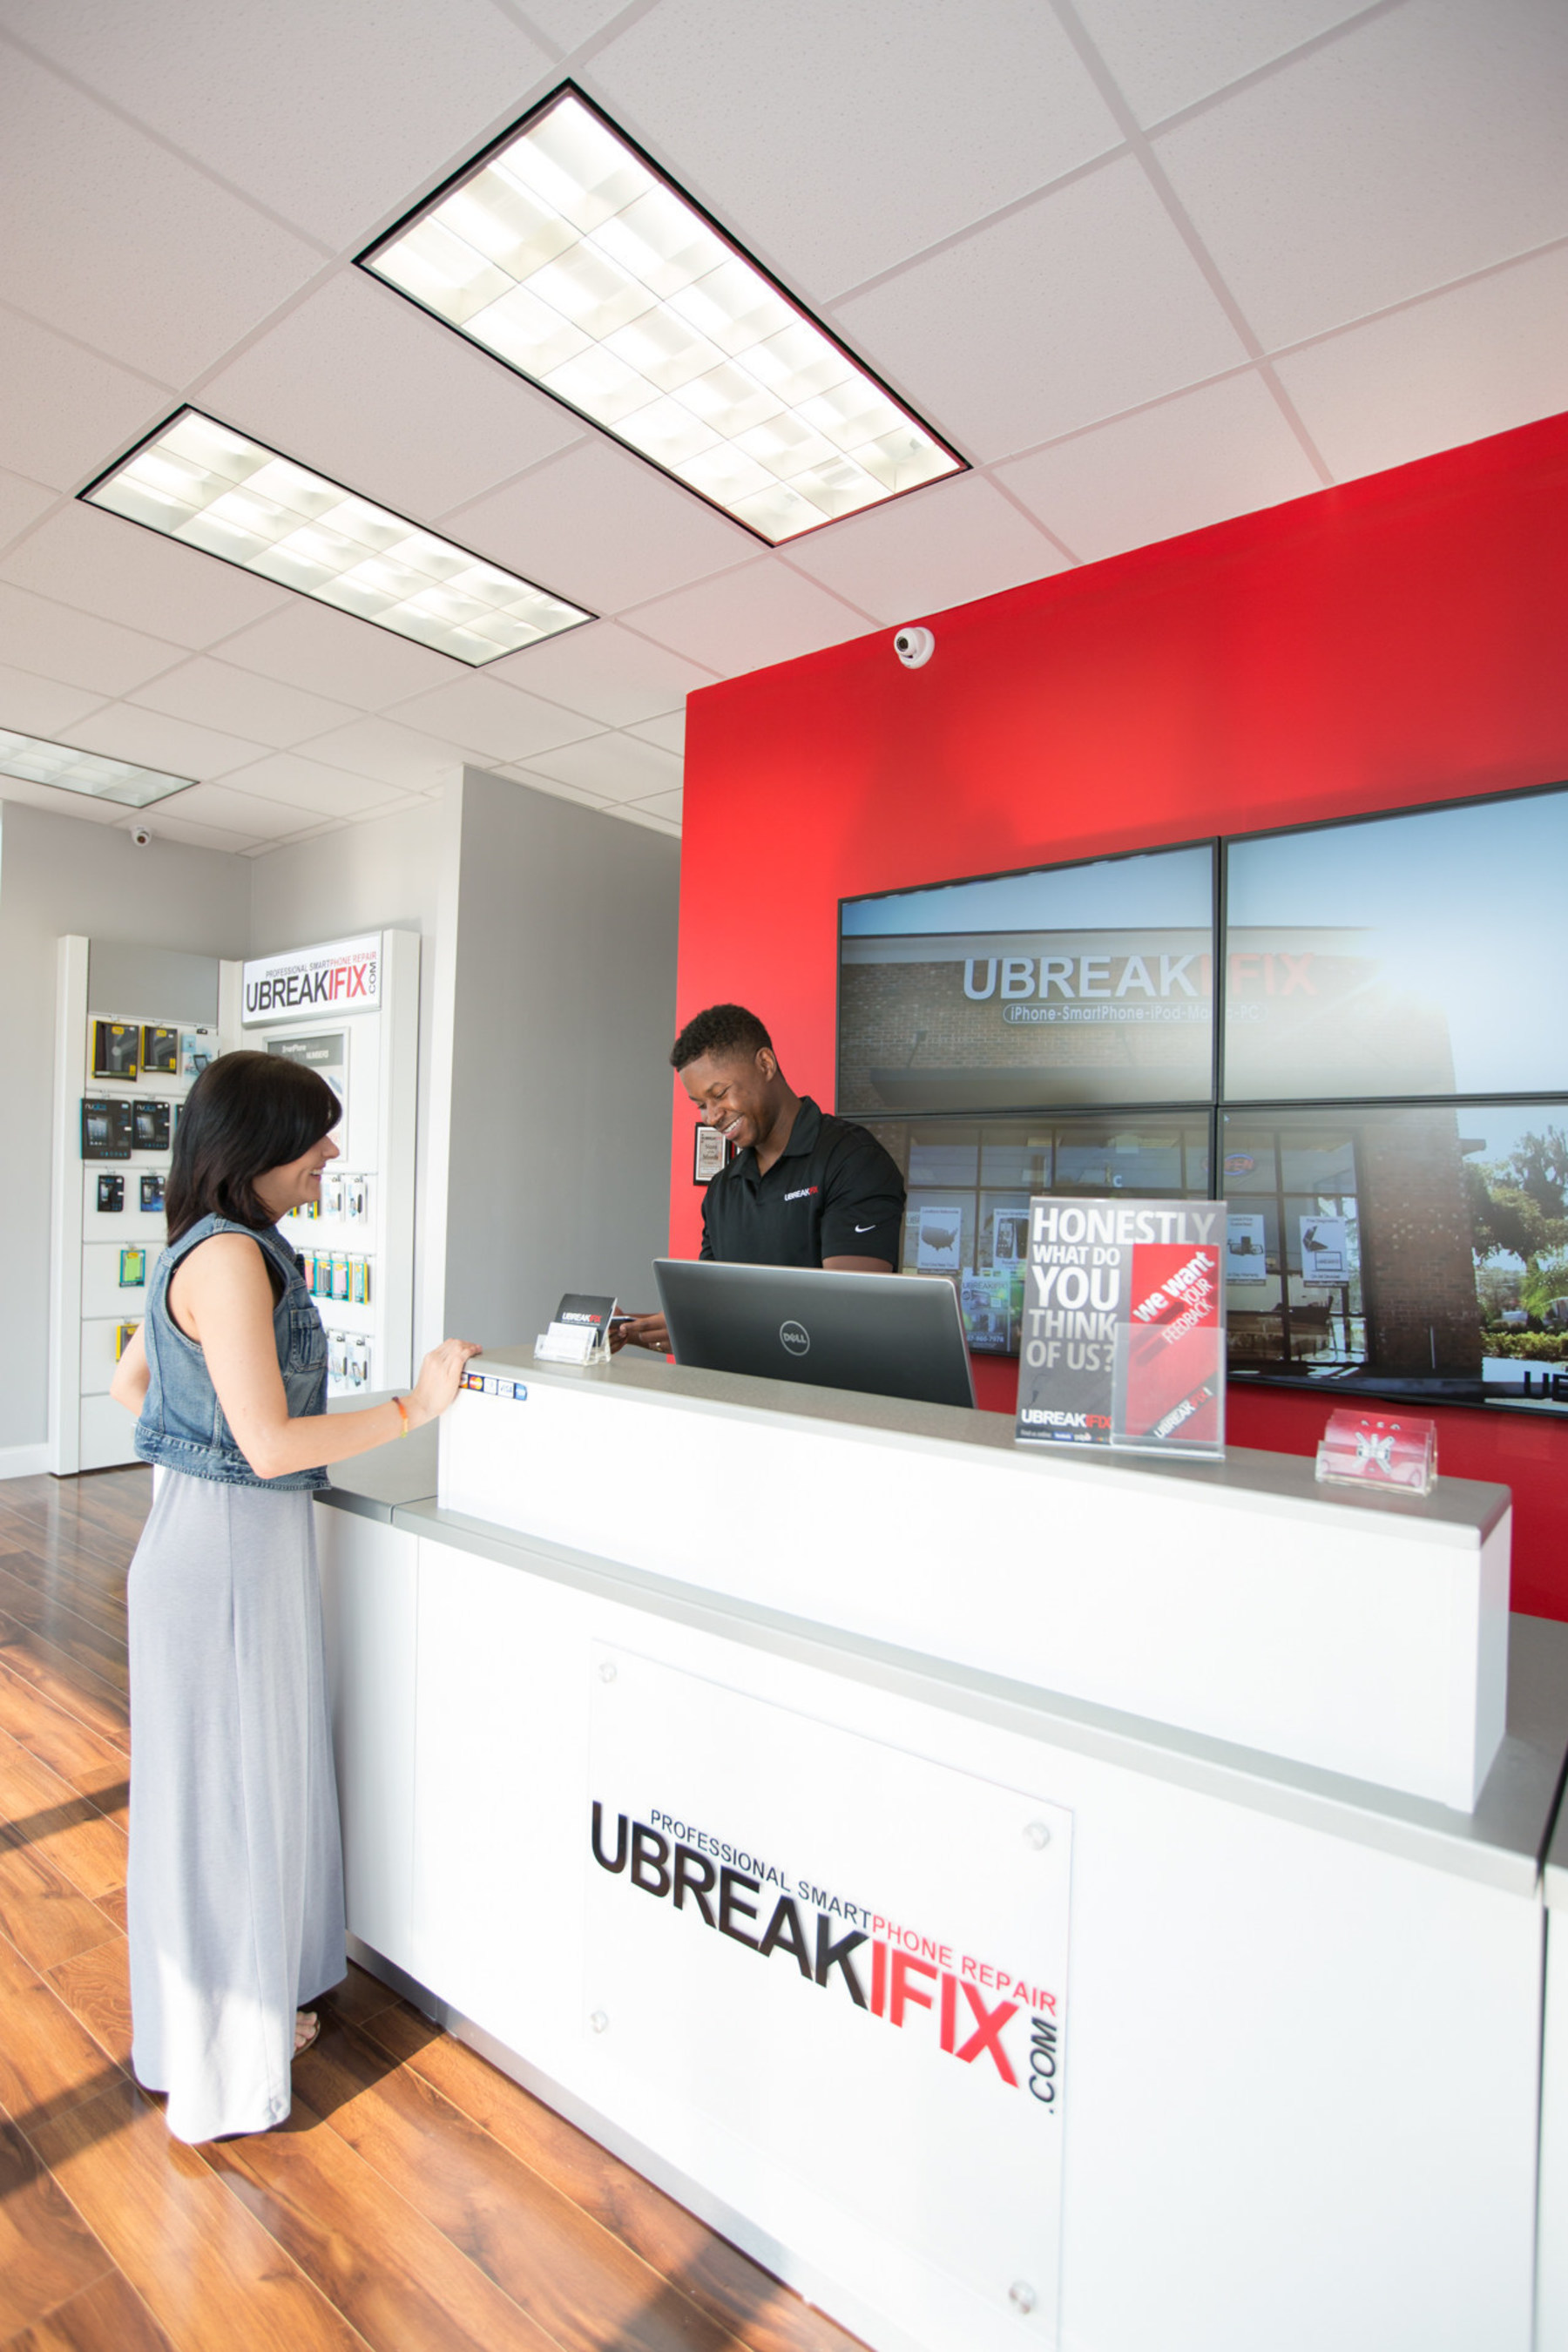 uBreakiFix specializes in the repair of small electronics, ranging from smartphones, game consoles, tablets, computers and everything in between. Cracked screens, water damage, software issues, camera issues, and most any other problem can be repaired by visiting a uBreakiFix store across the U.S. and in Canada. For more information, visit ubreakifix.com.